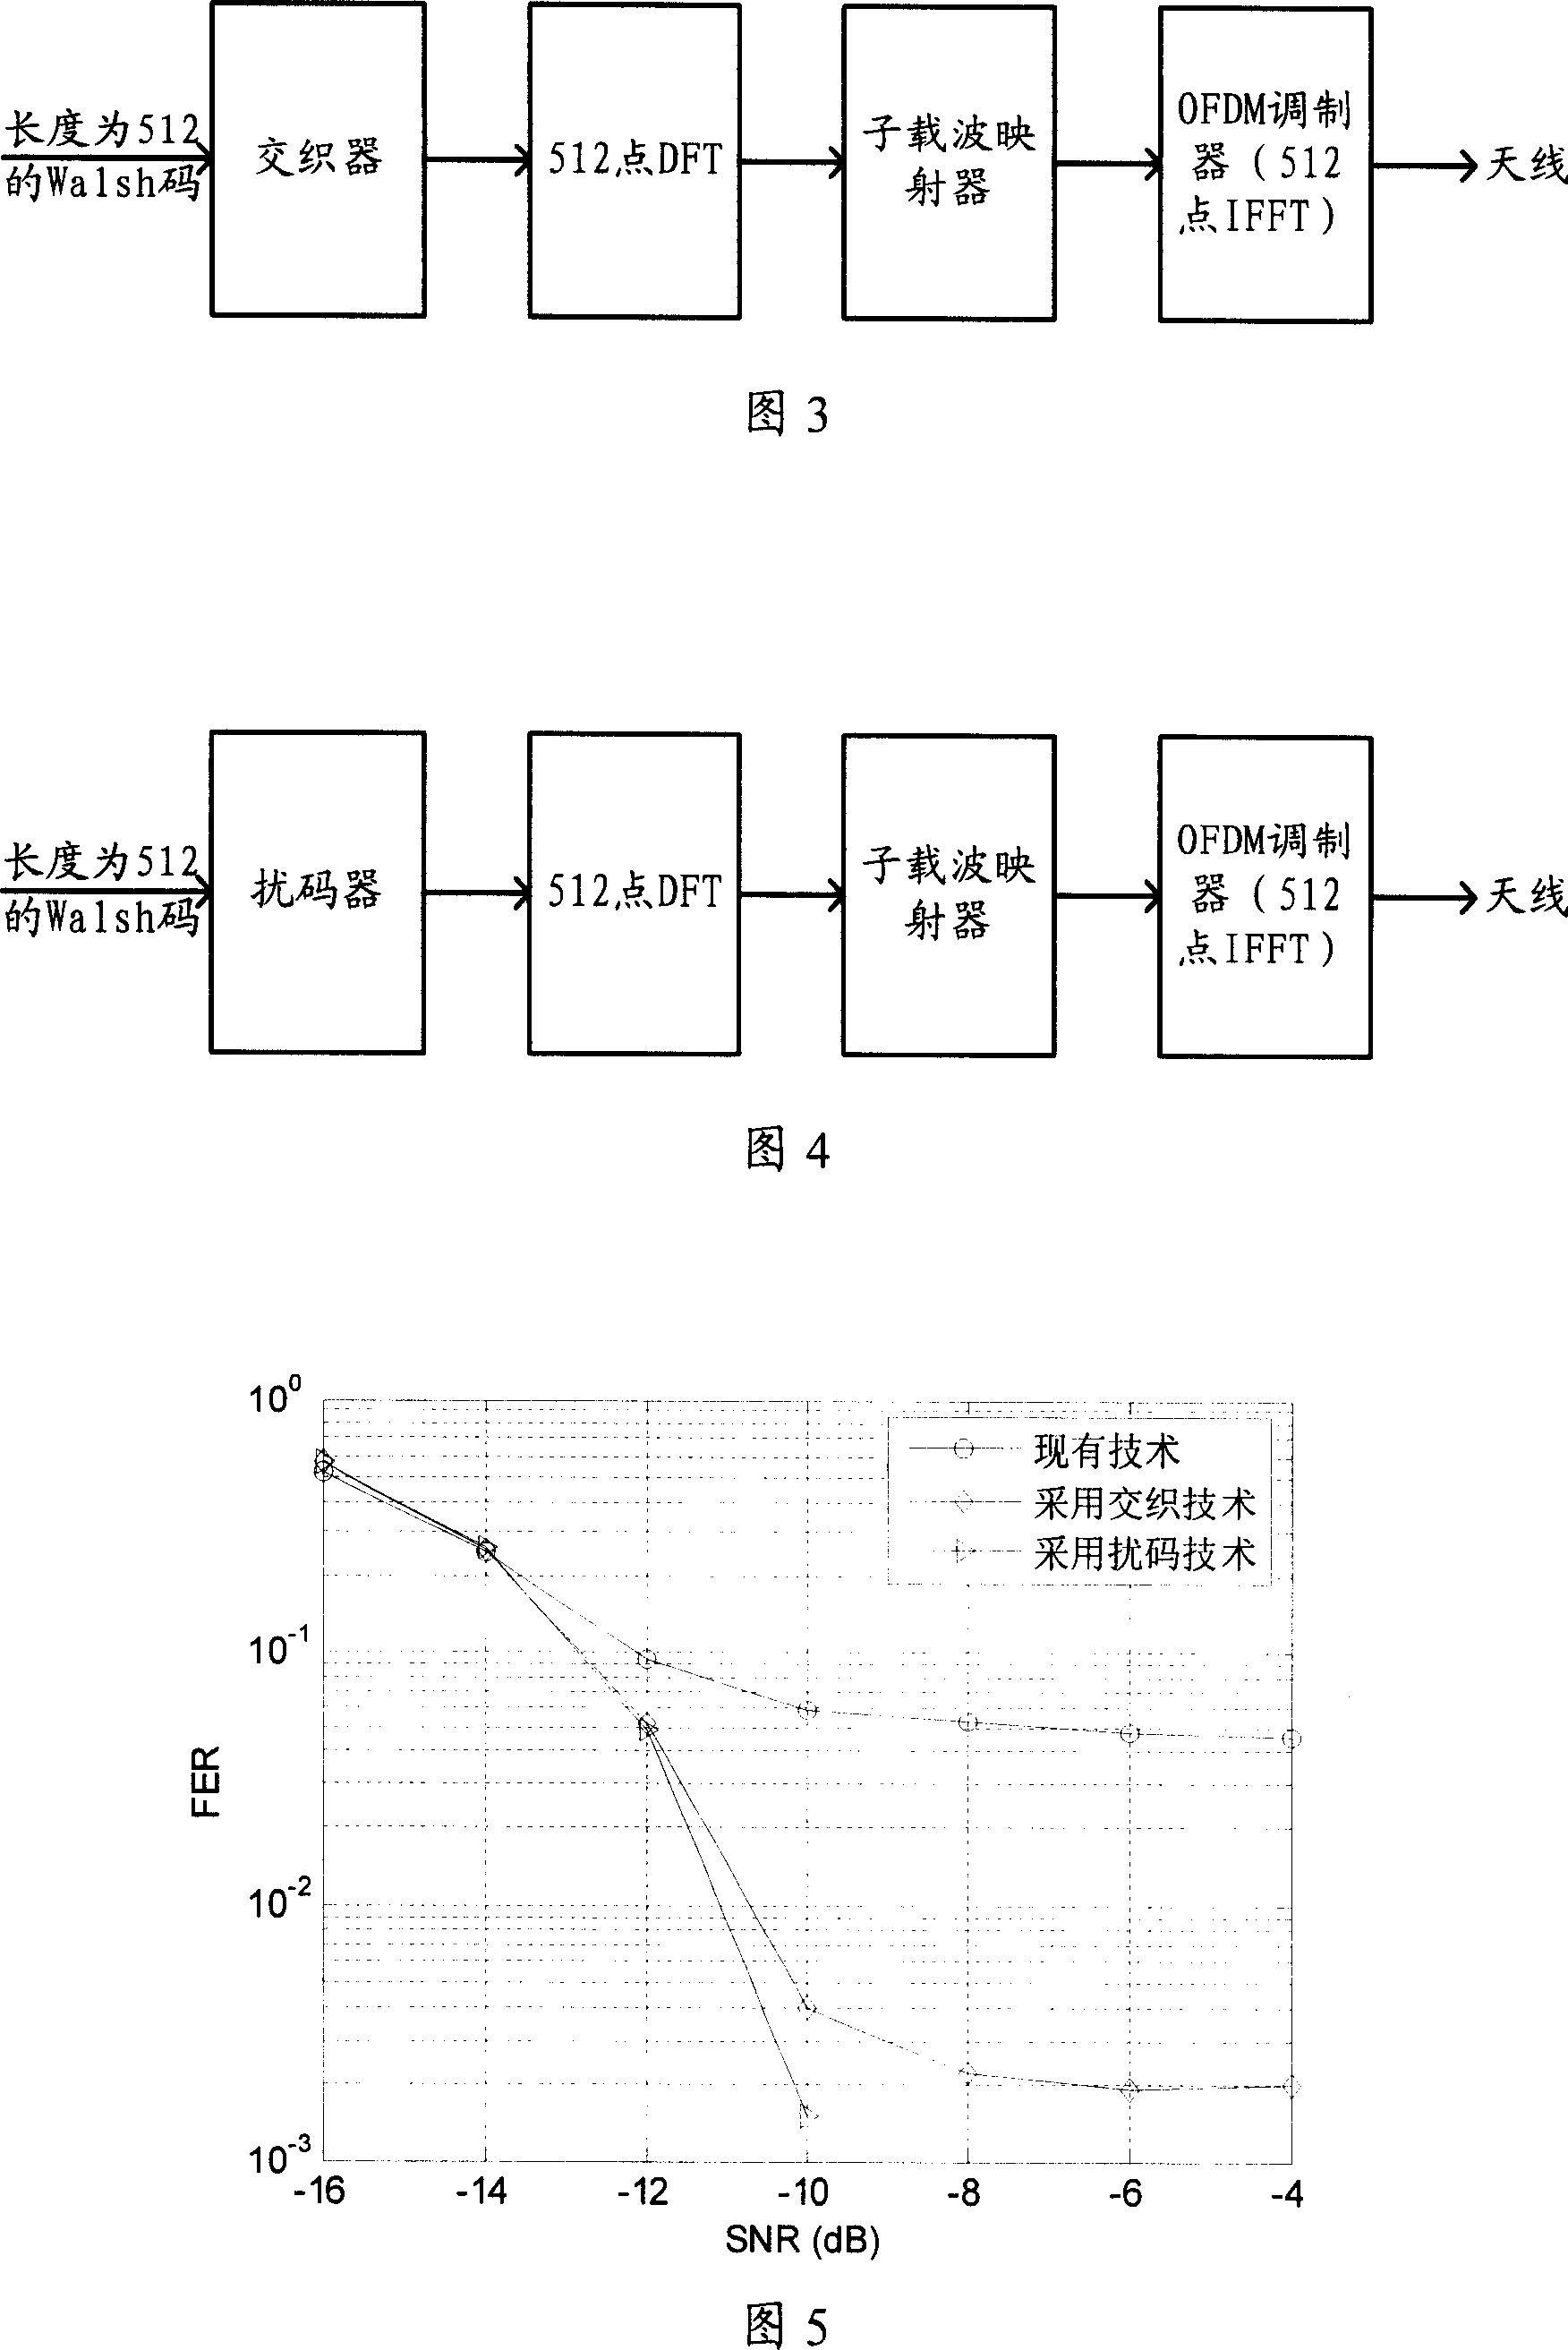 OFDM based signal receiving and dispatching method and apparatus